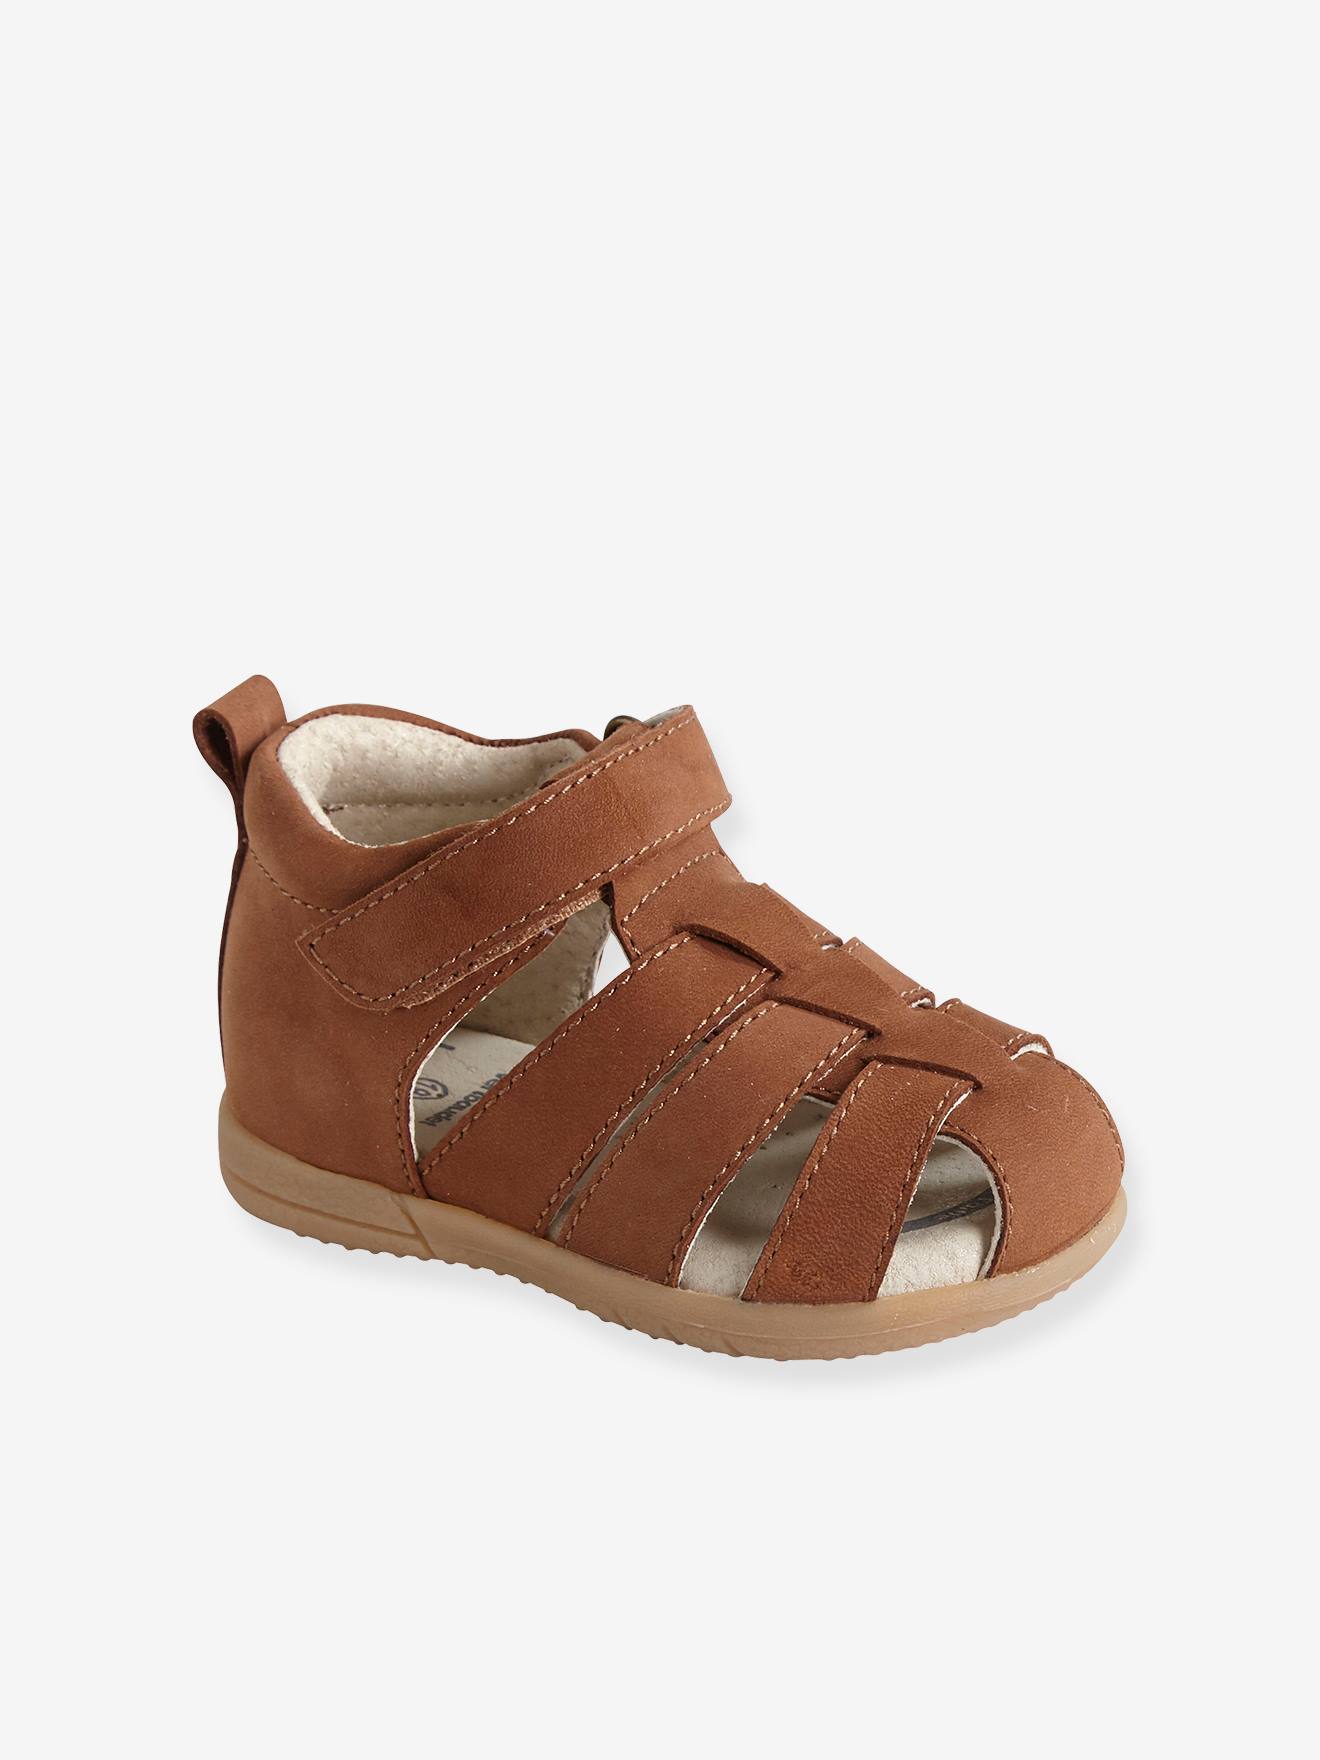 magie scherp Civic Leather Sandals for Baby Boys, Designed for First Steps - camel, Shoes